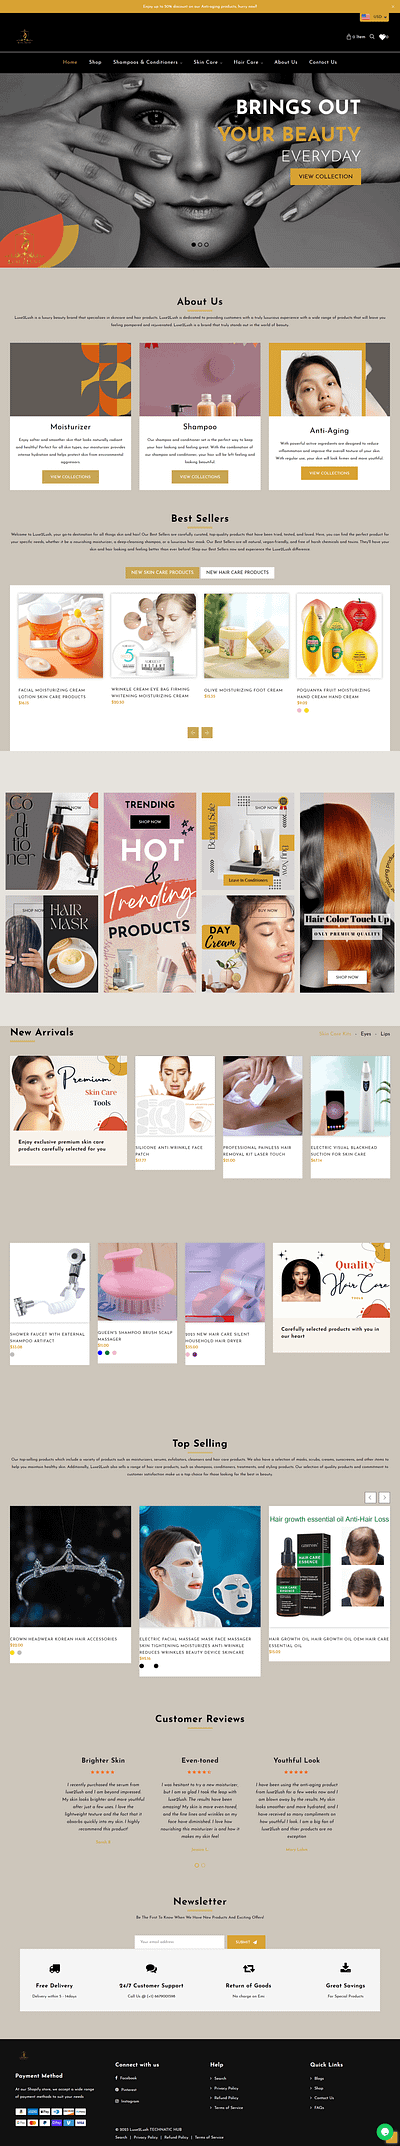 Beauty Shopify Store Design beauty store brainstorming branding ecommerce ecommerce automation graphic design logo design niche research product sourcing shopify shopify store supplier research ui